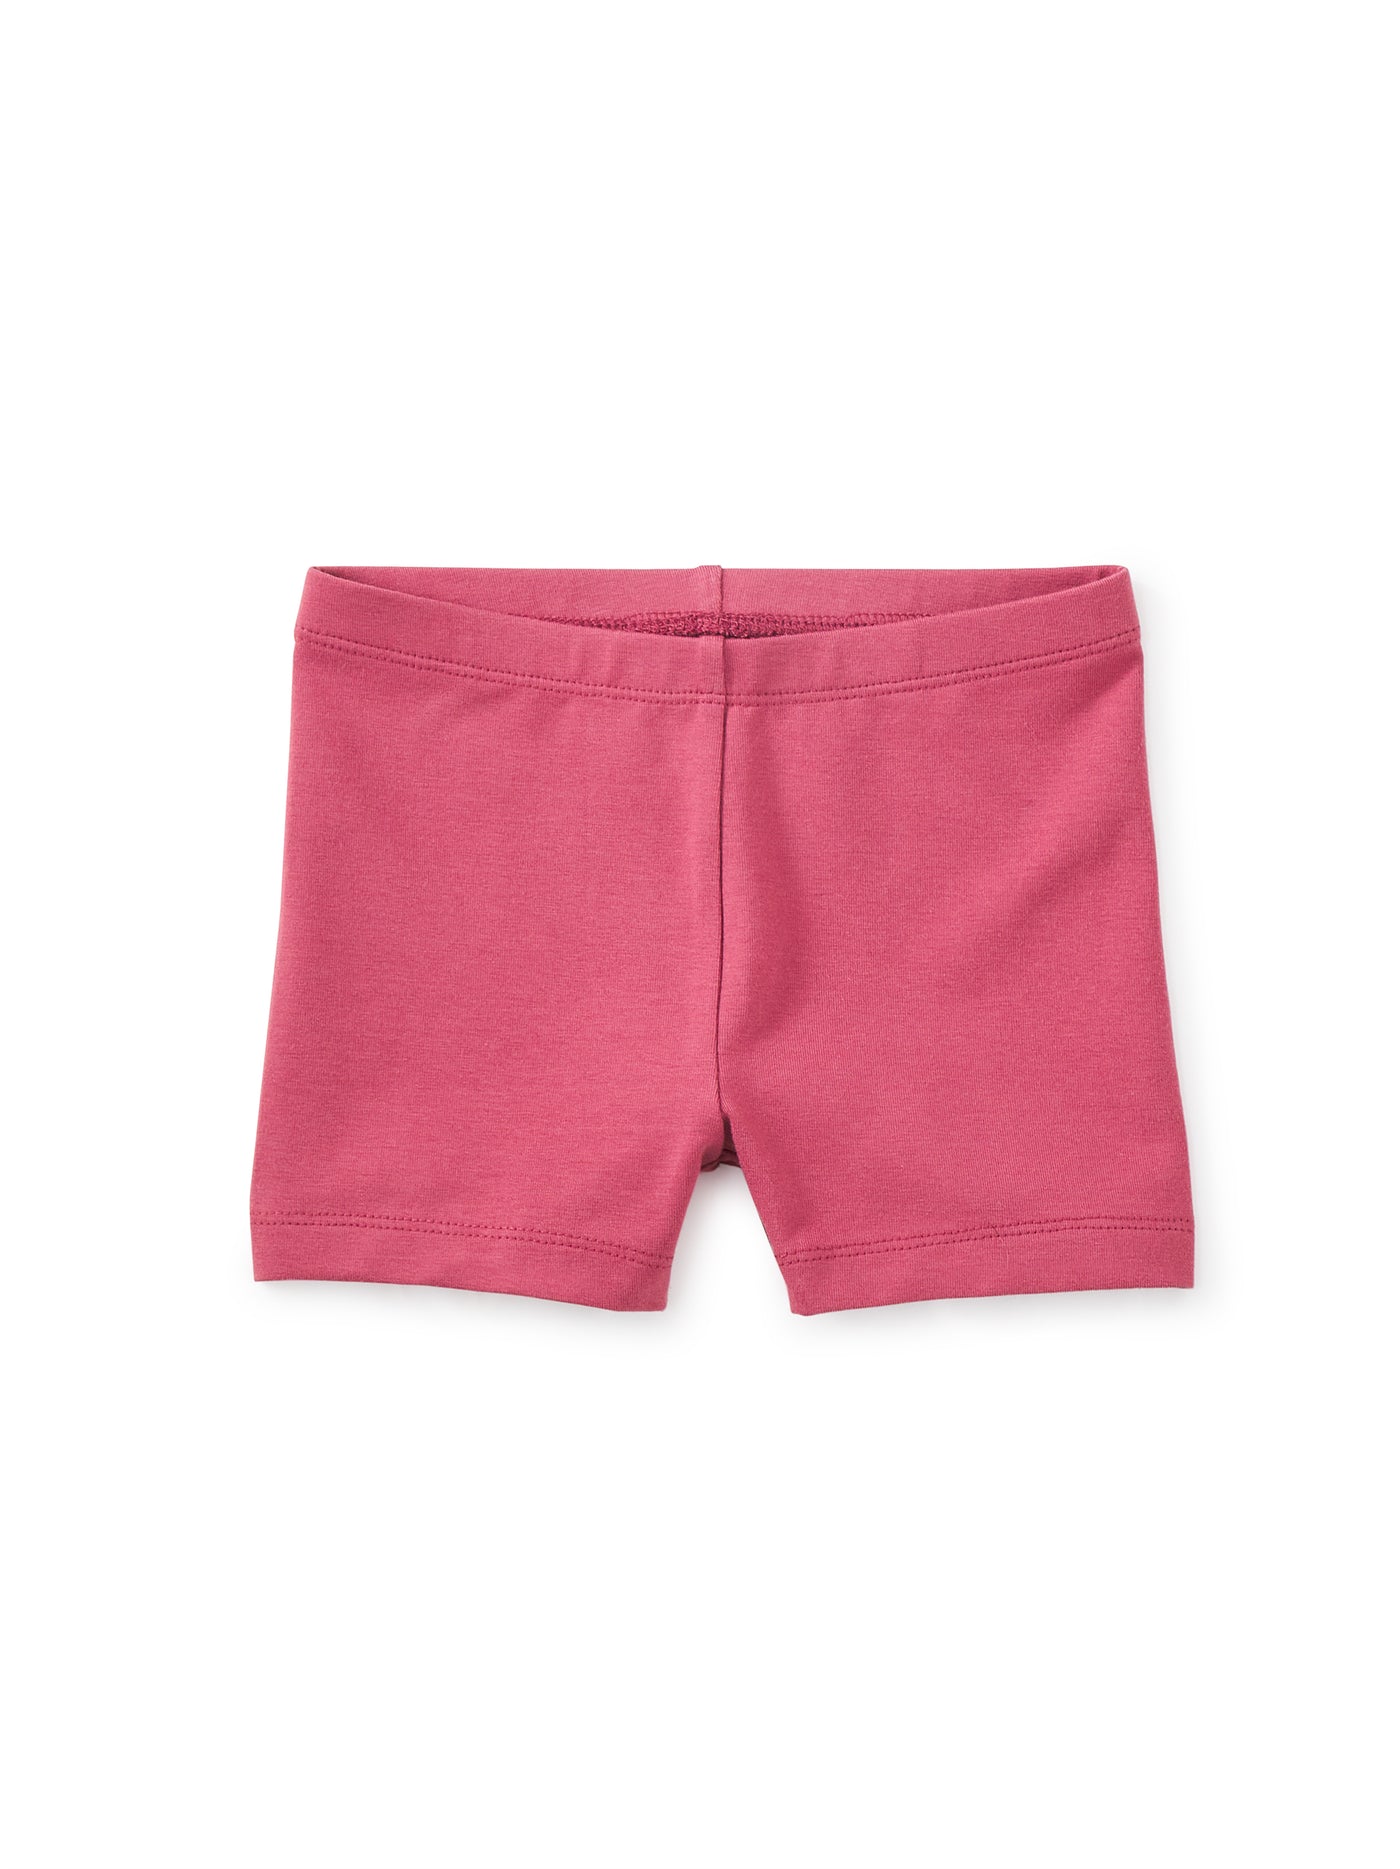 Somersault Shorts in Cassis